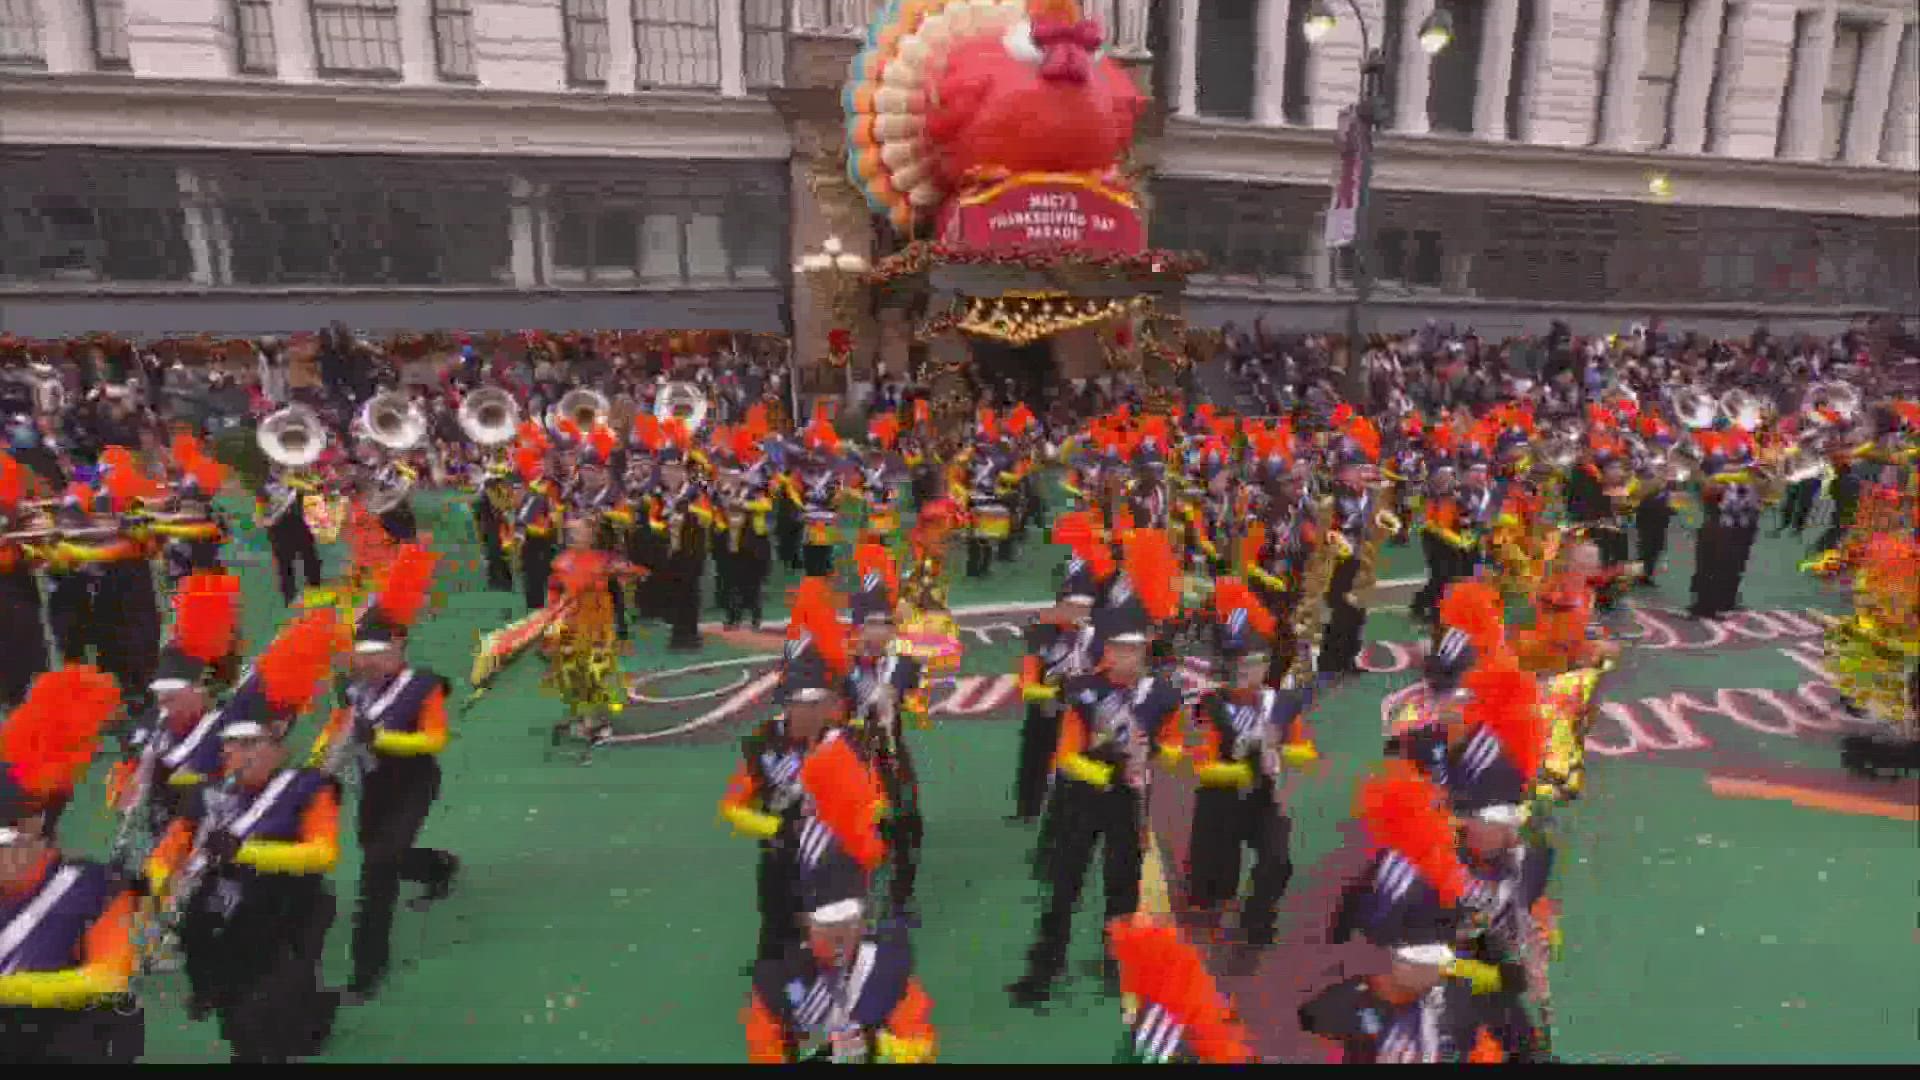 The 190-member marching band played "Mirko" from Cirque du Soleil.